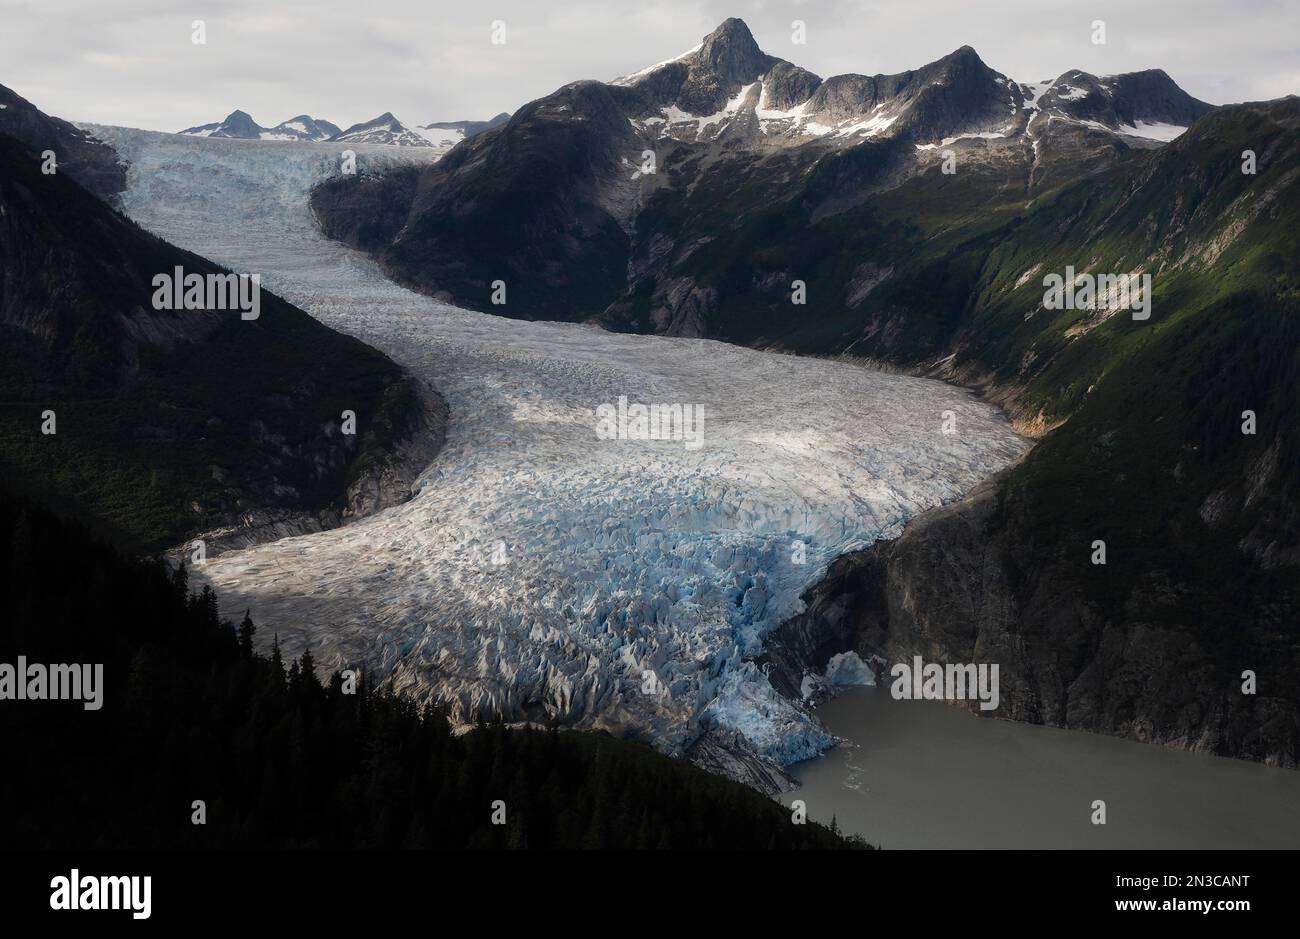 Taku Glacier is a tidewater glacier and the deepest and thickest alpine temperate glacier in the world. It originates in the Juneau Icefield of the... Stock Photo